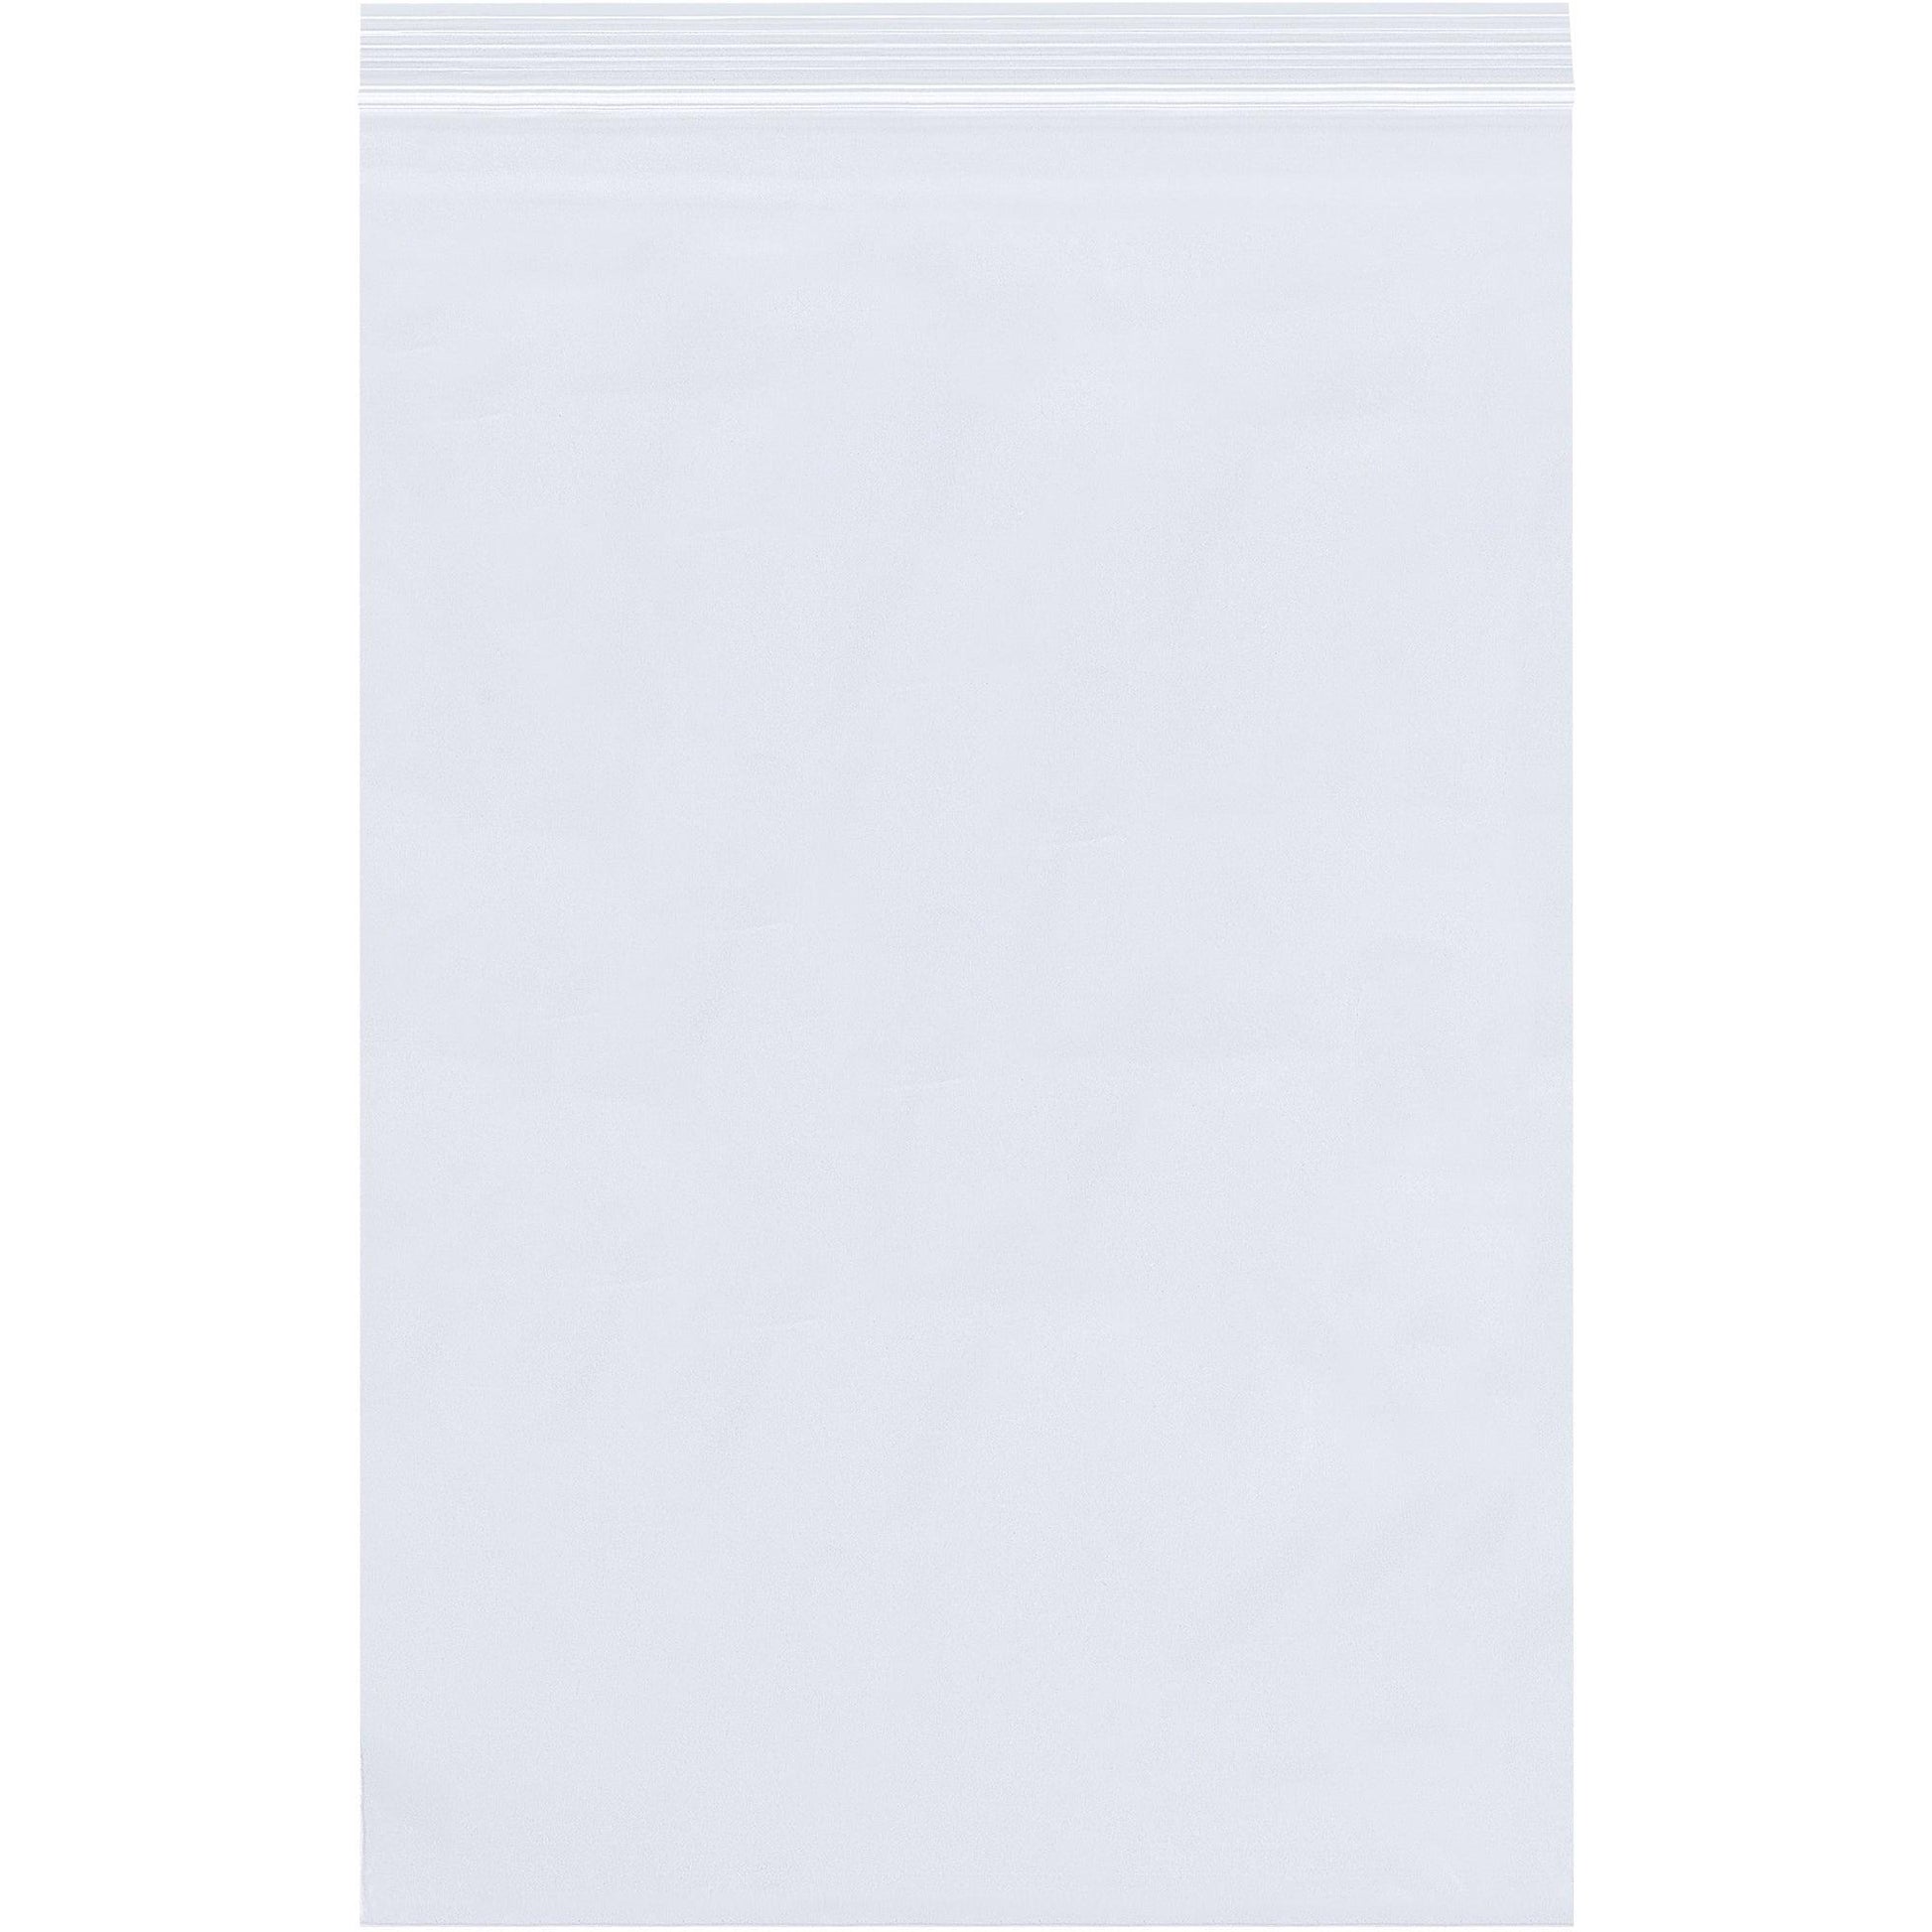 10 x 12" - 4 Mil Reclosable Poly Bags - PB3775